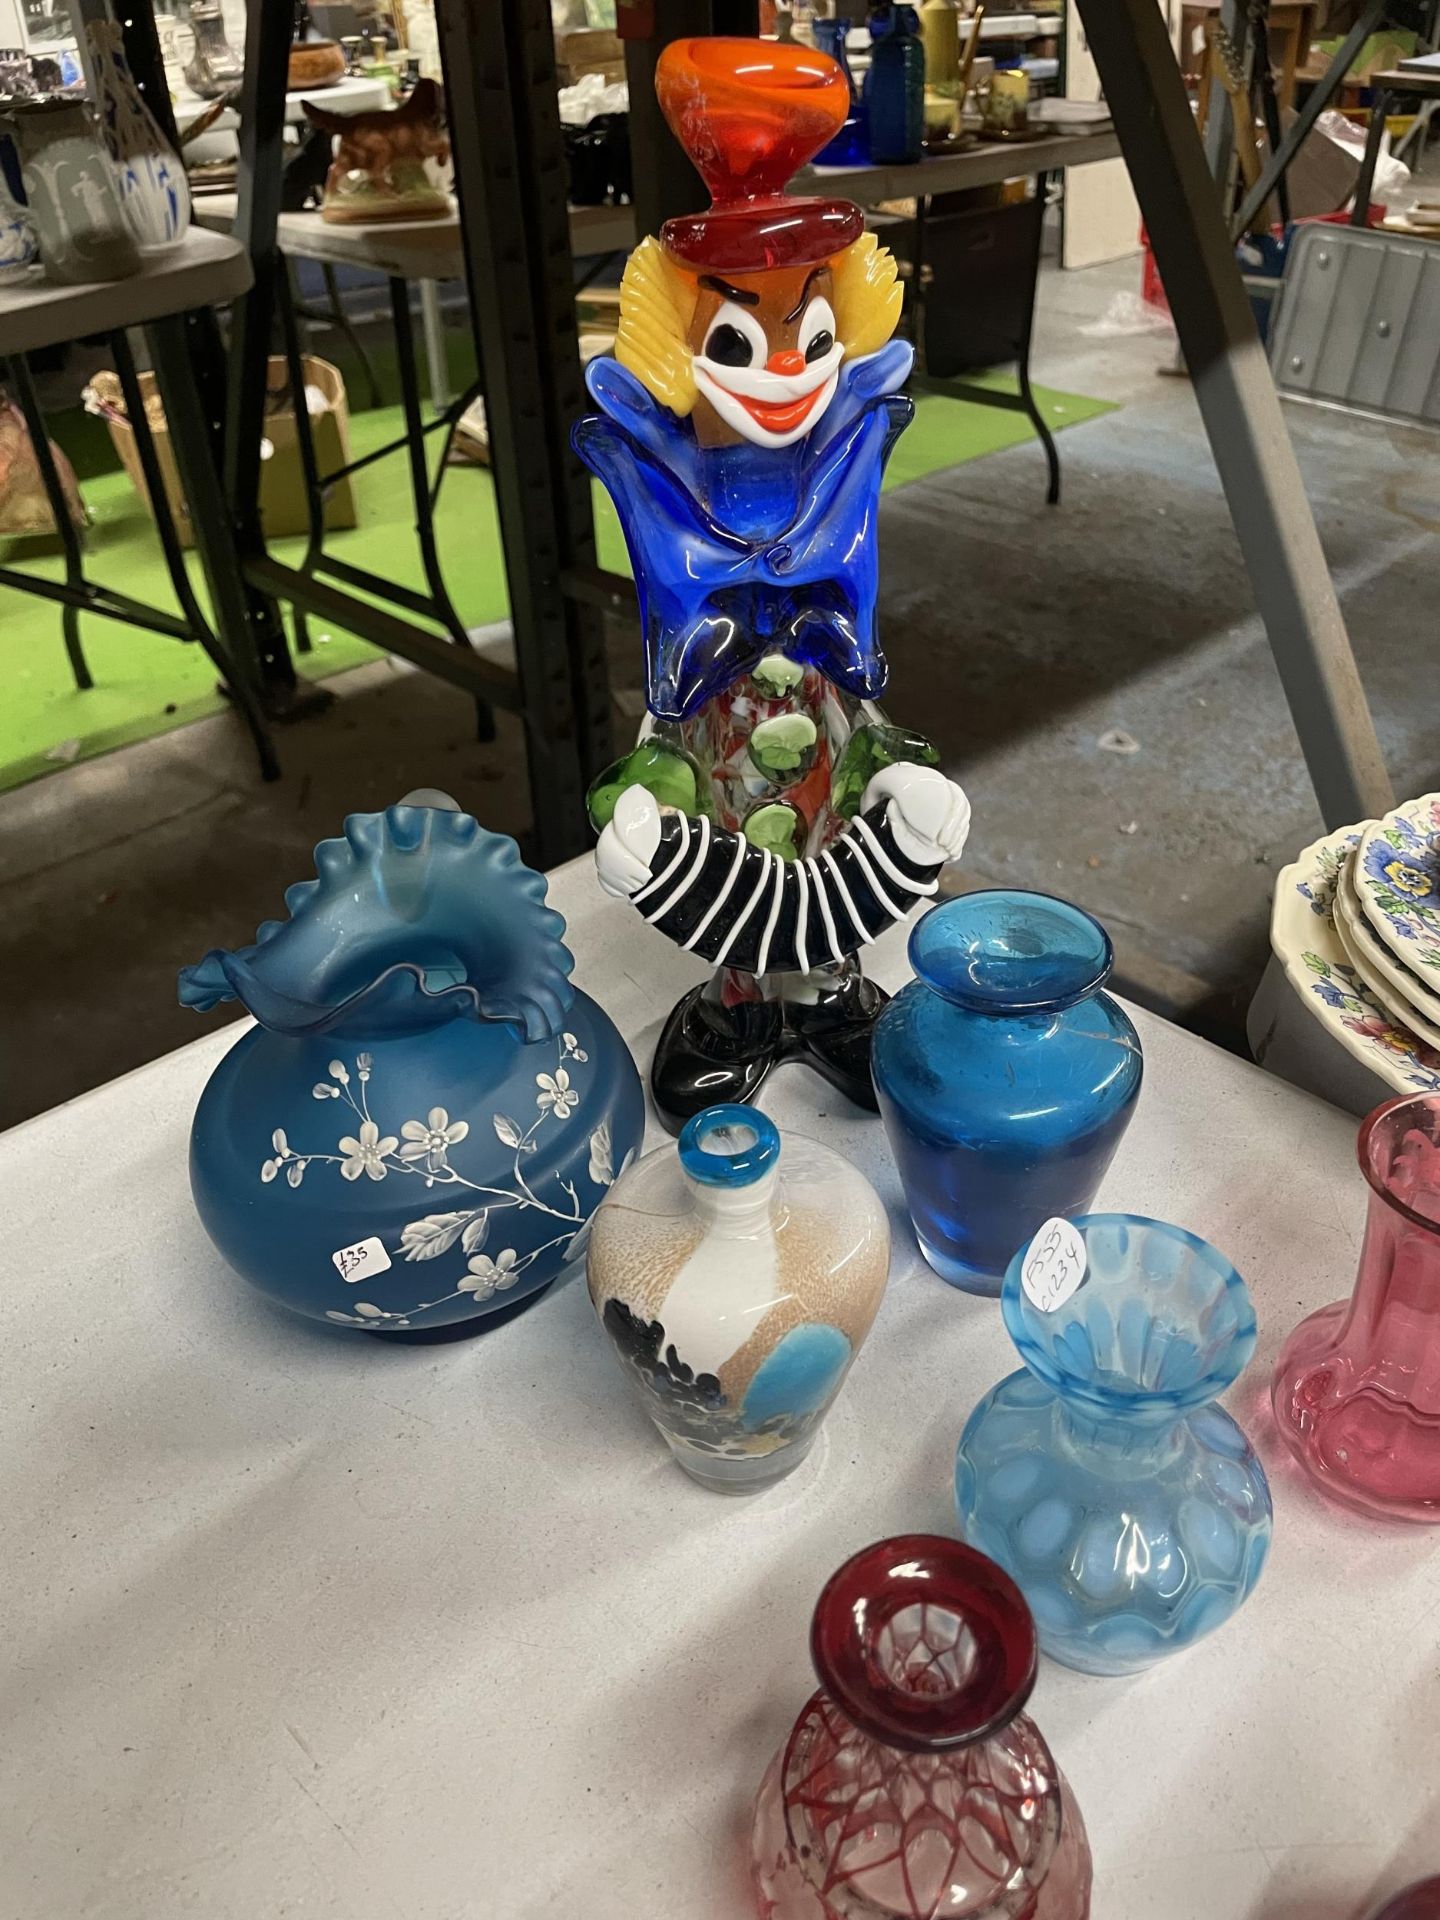 A QUANTITY OF GLASSWARE TO INCLUDE A MURANO STYLE CLOWN, CRANBERRY, BLUE, VASES, JUGS, ETC - Image 2 of 2